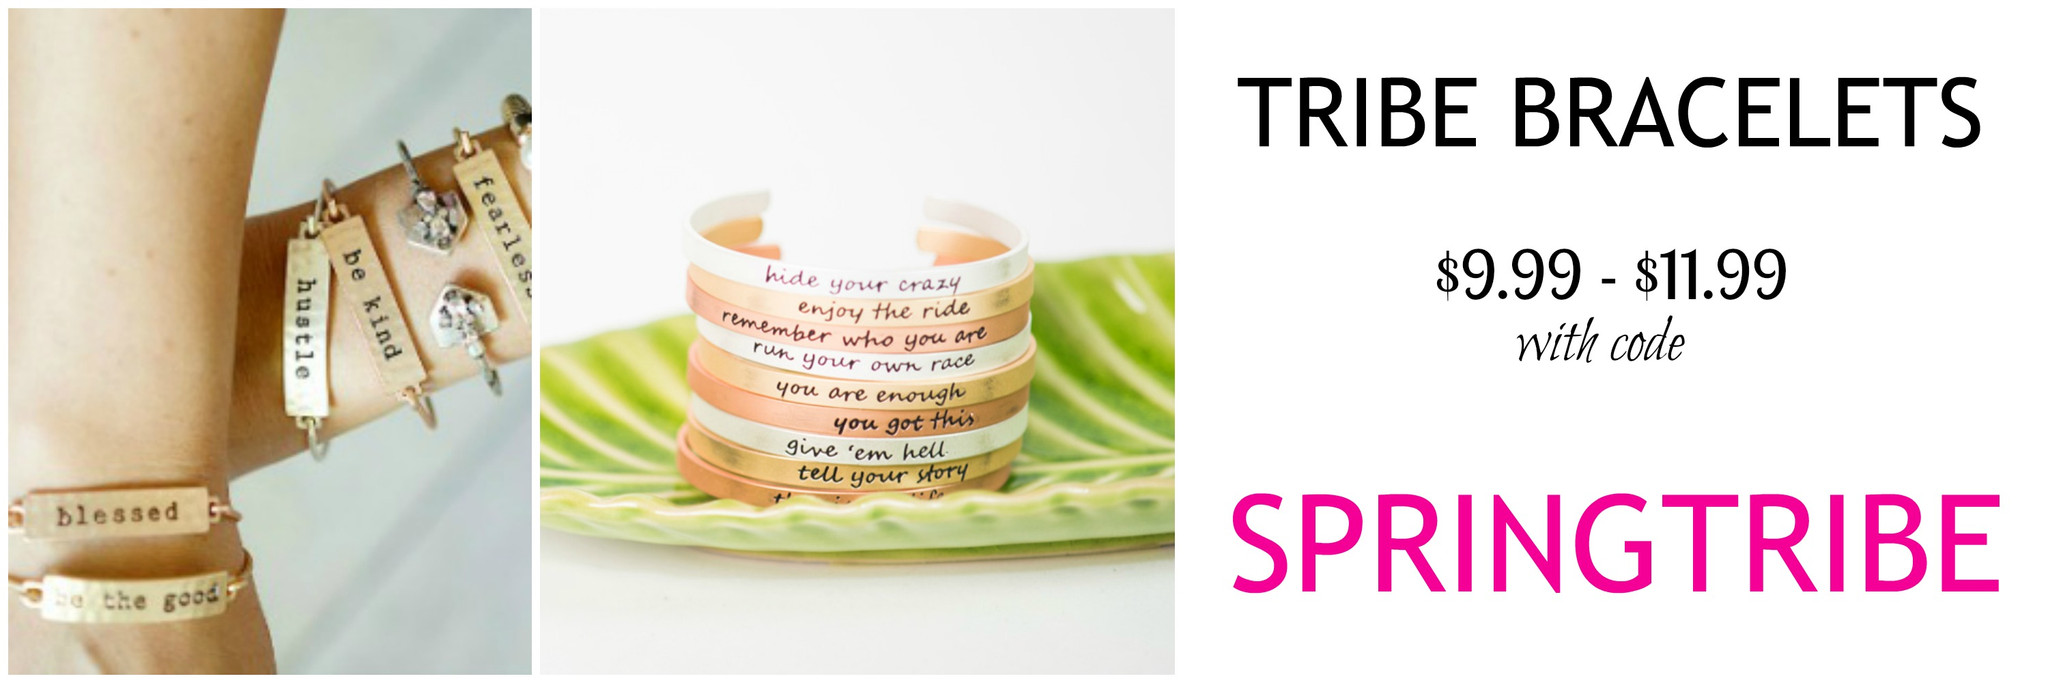 Uplifting Stamped Tribe Bracelets as Low as $9.99 Shipped